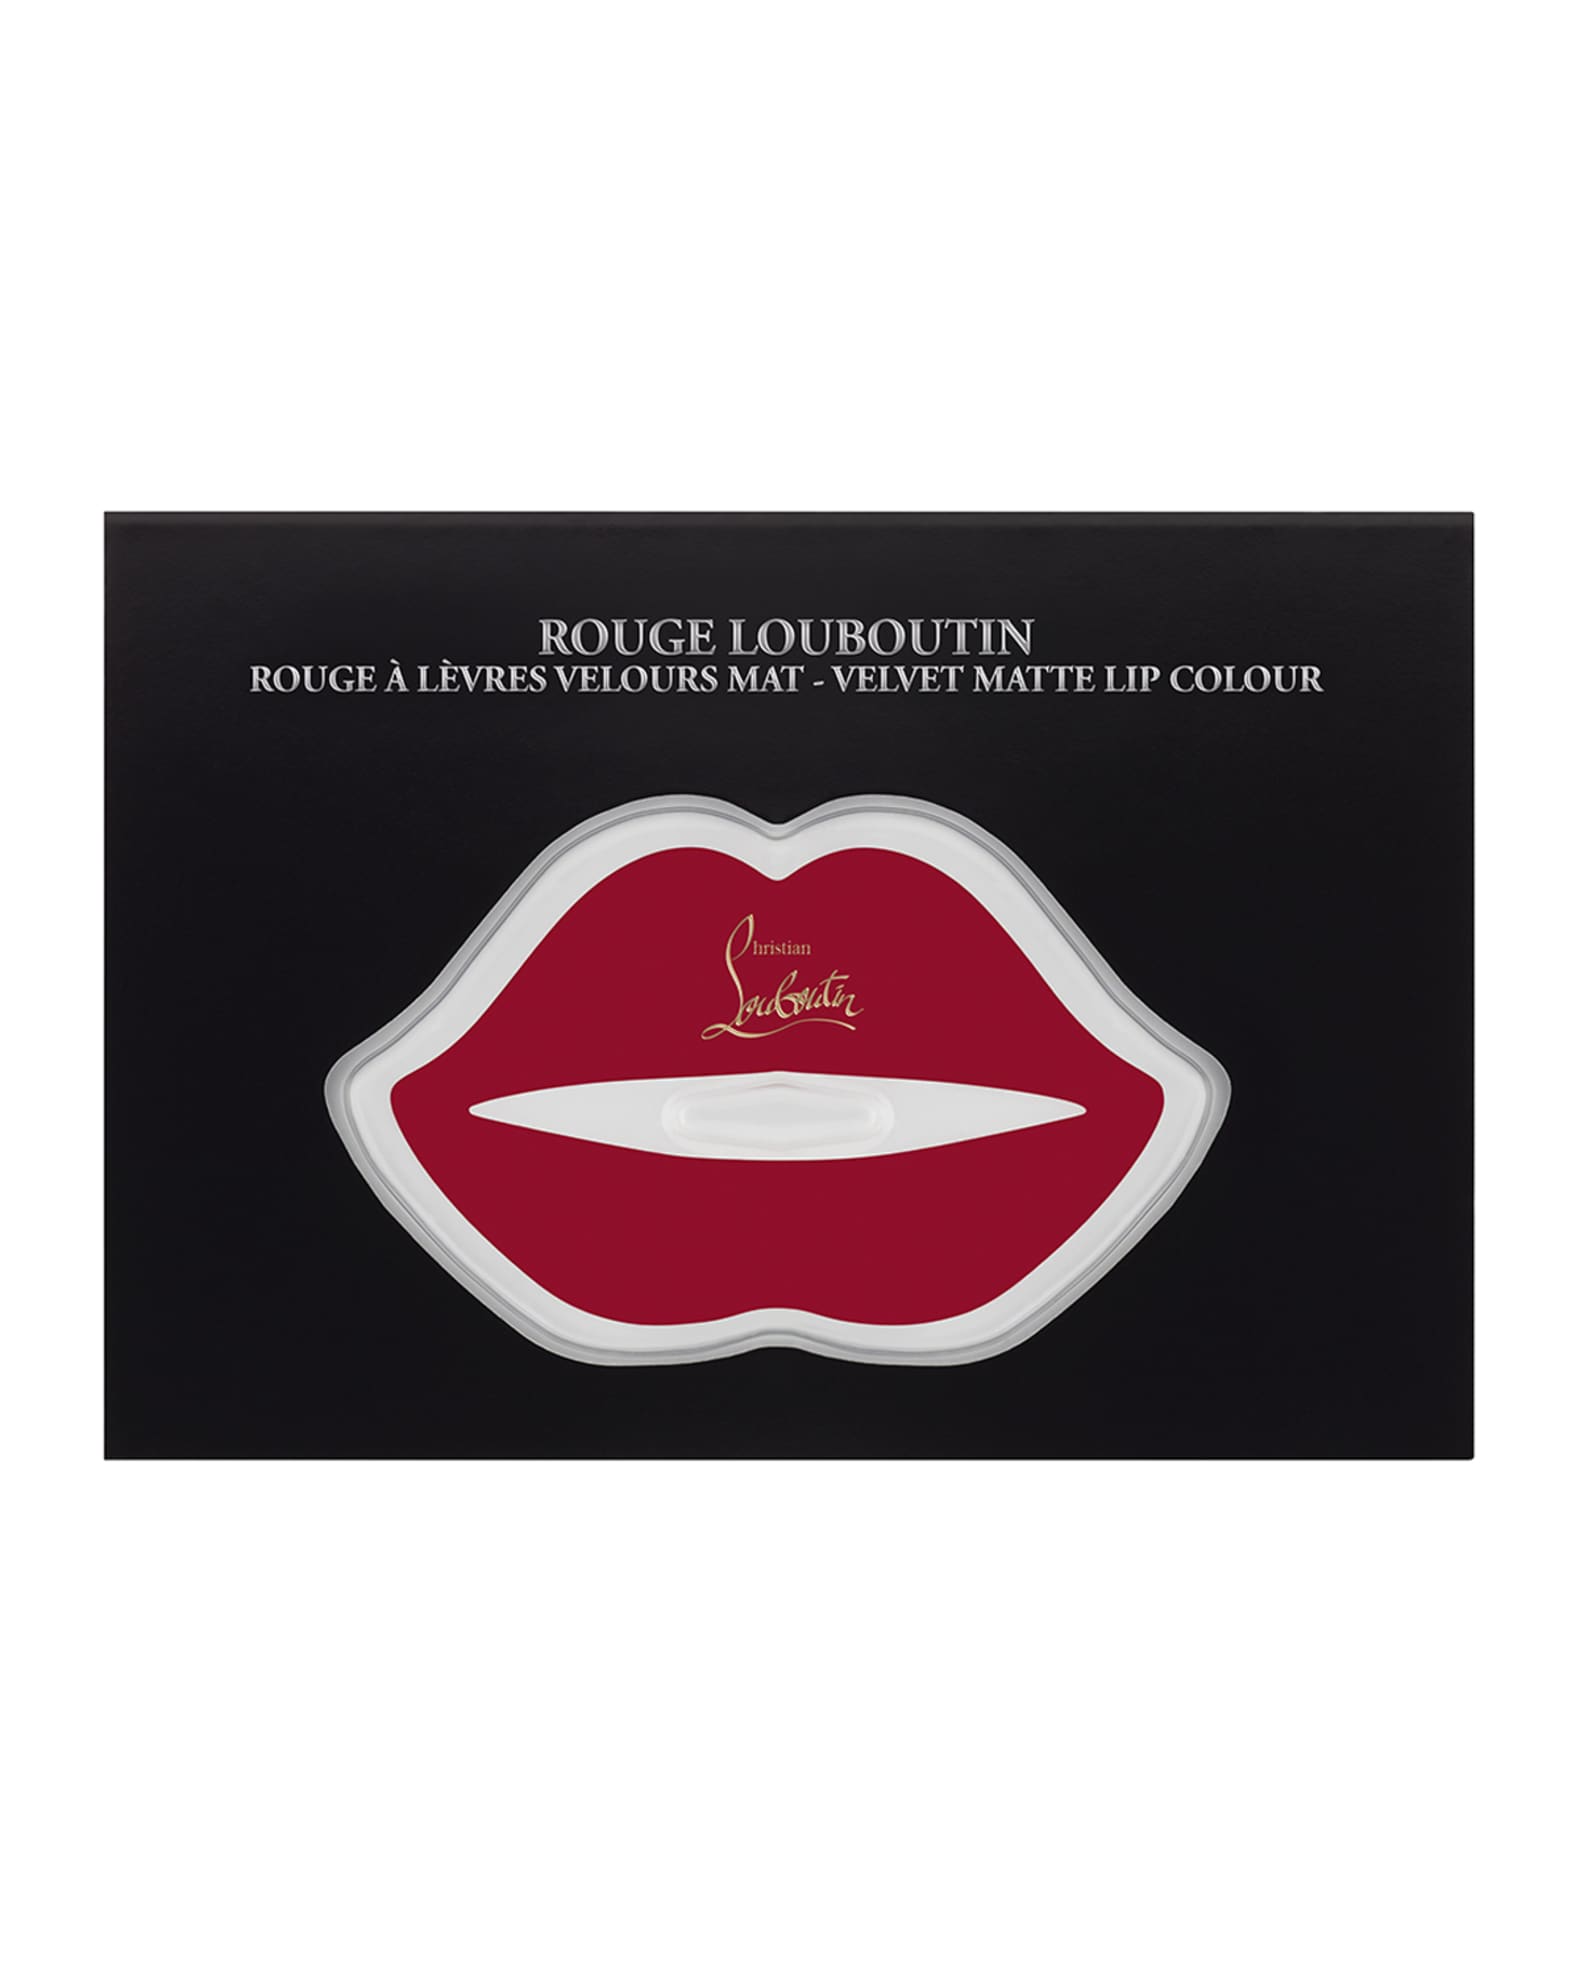 Christian Louboutin Velvet Matte Rouge Lip Colour Sample, Yours with any  $90 Christian Louboutin purchase